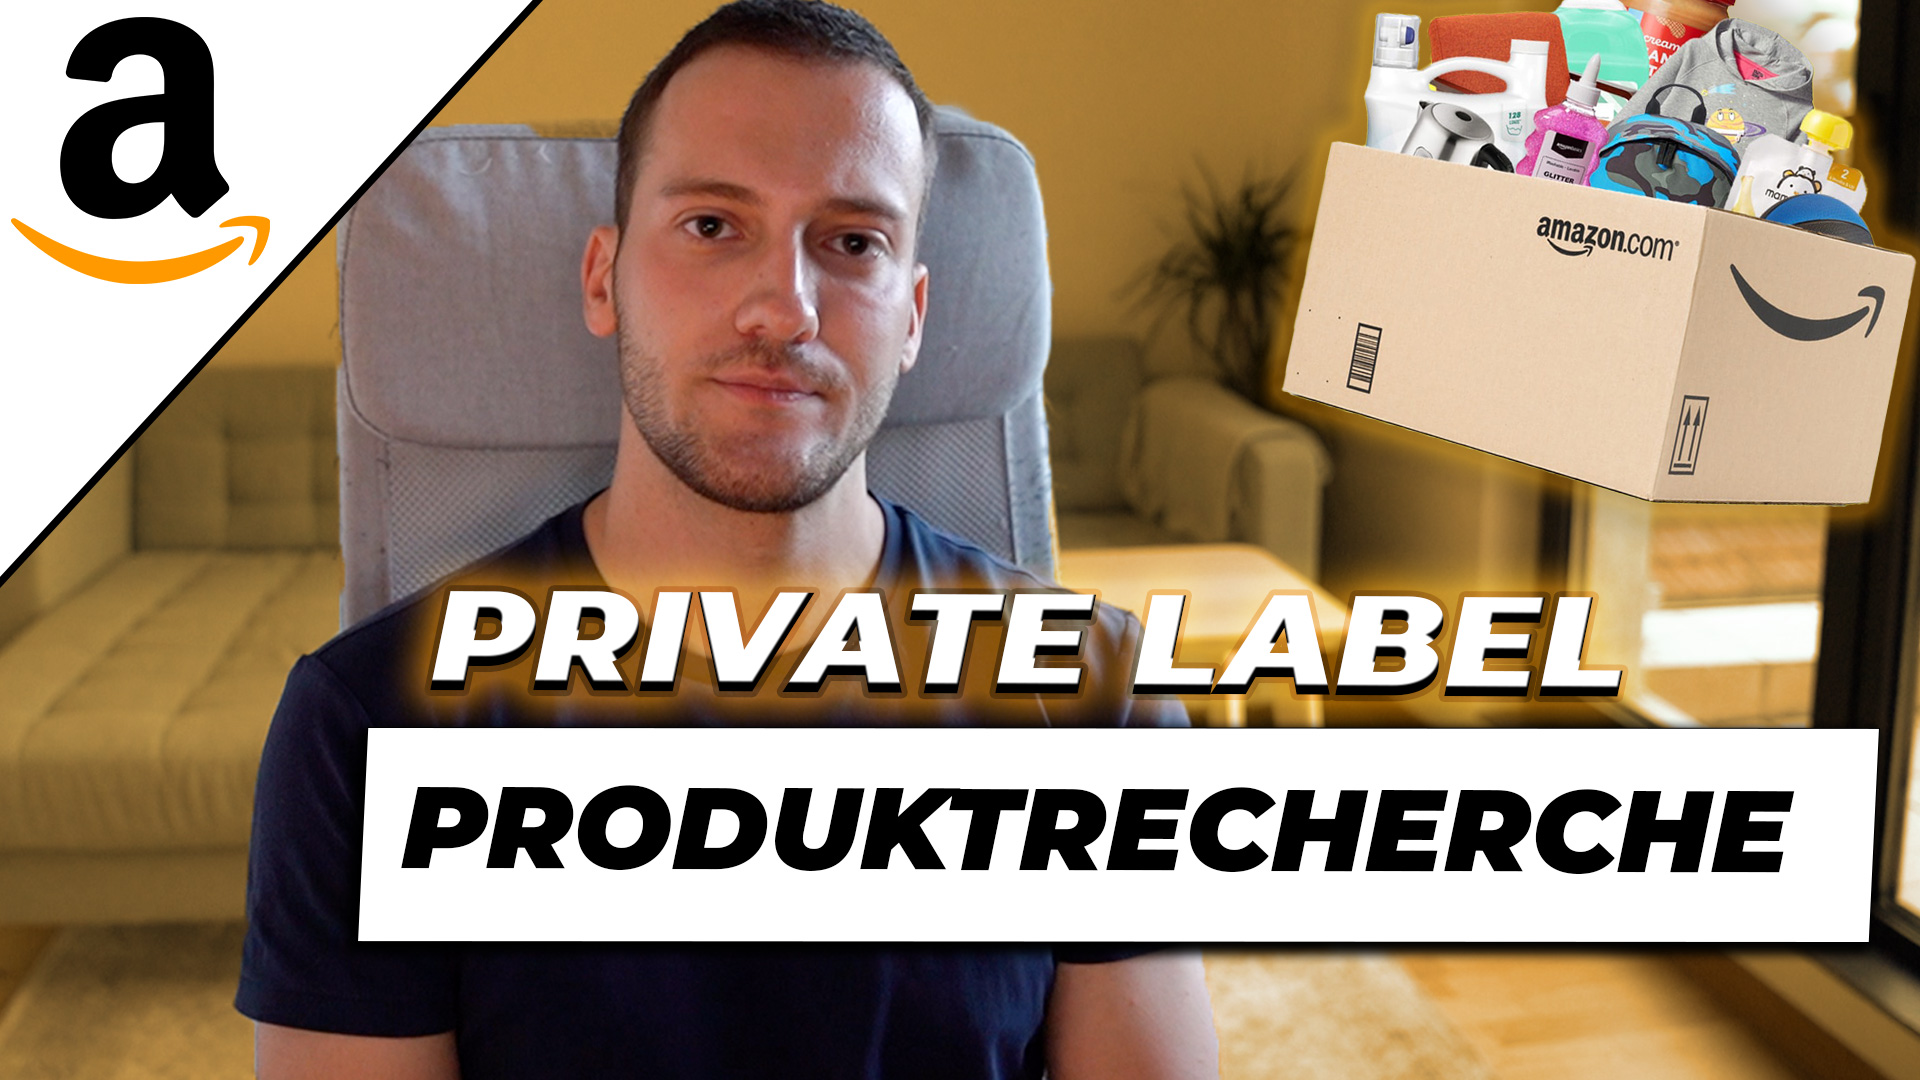 What is Amazon private label product research?